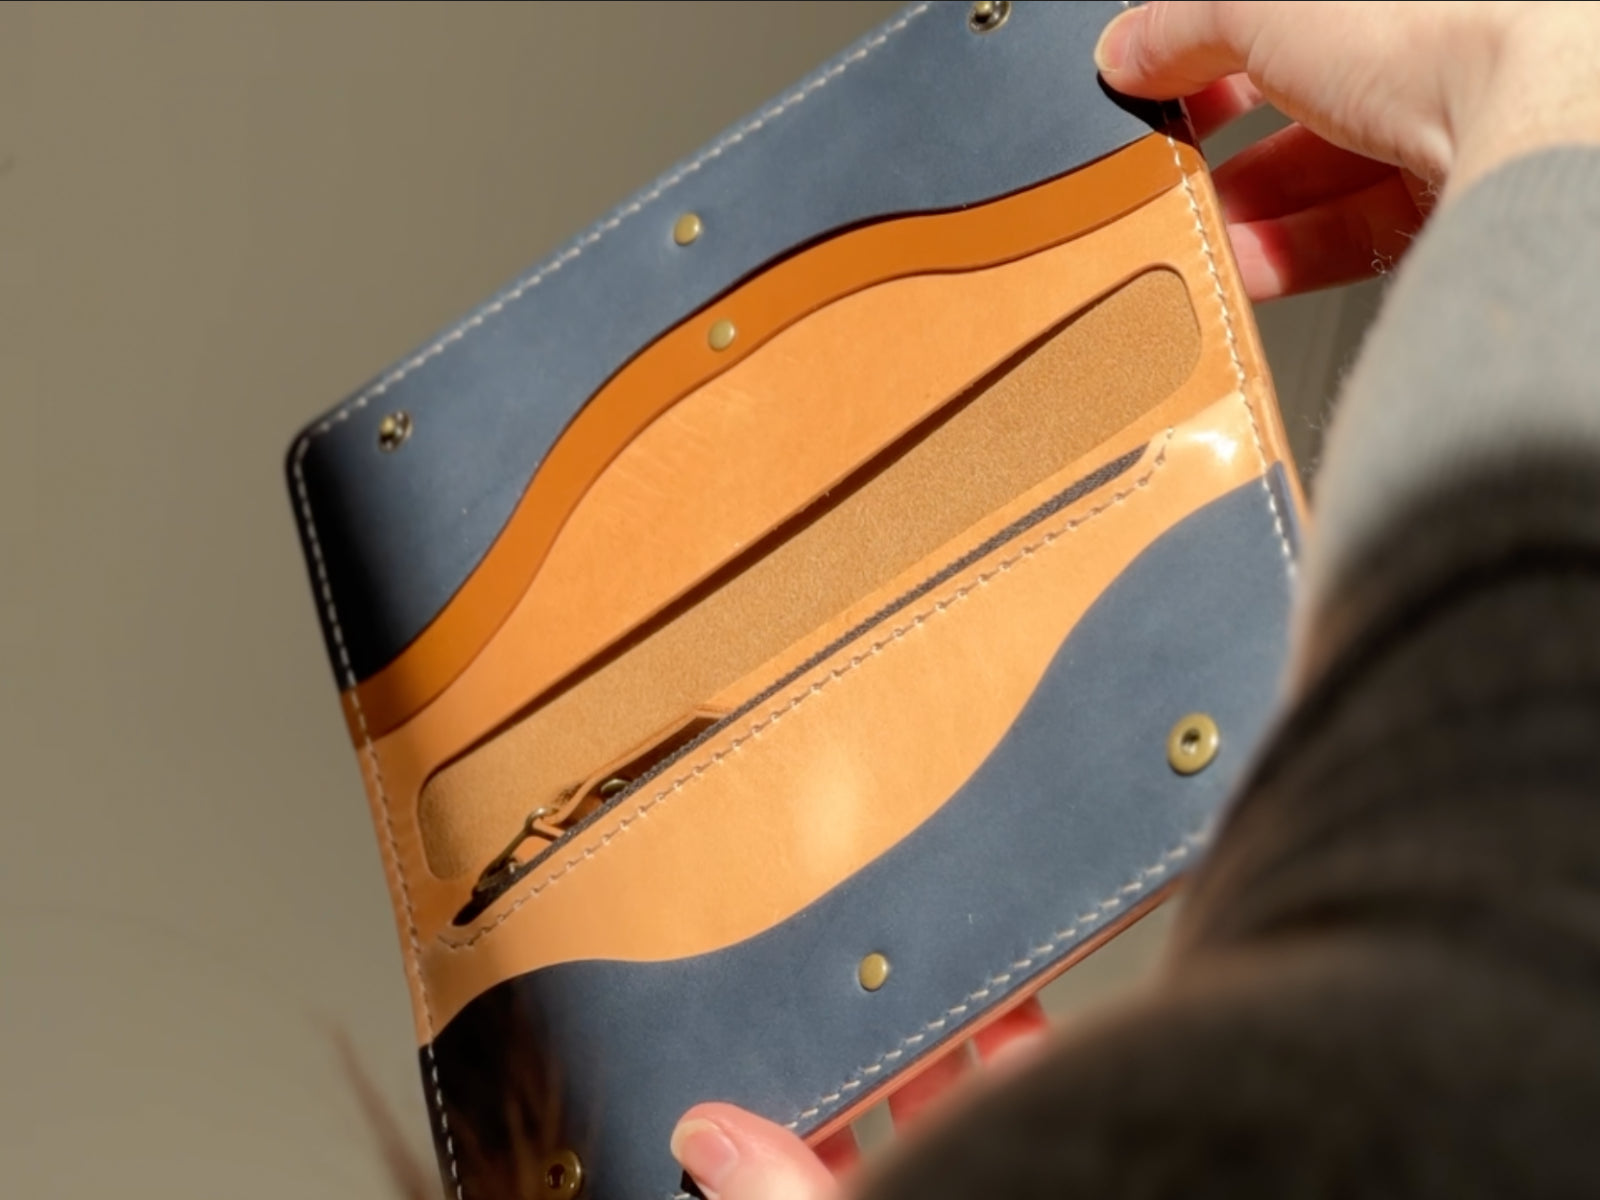 Build your own rosedale leather veg-tan wallet with navy, tan and russet pockets